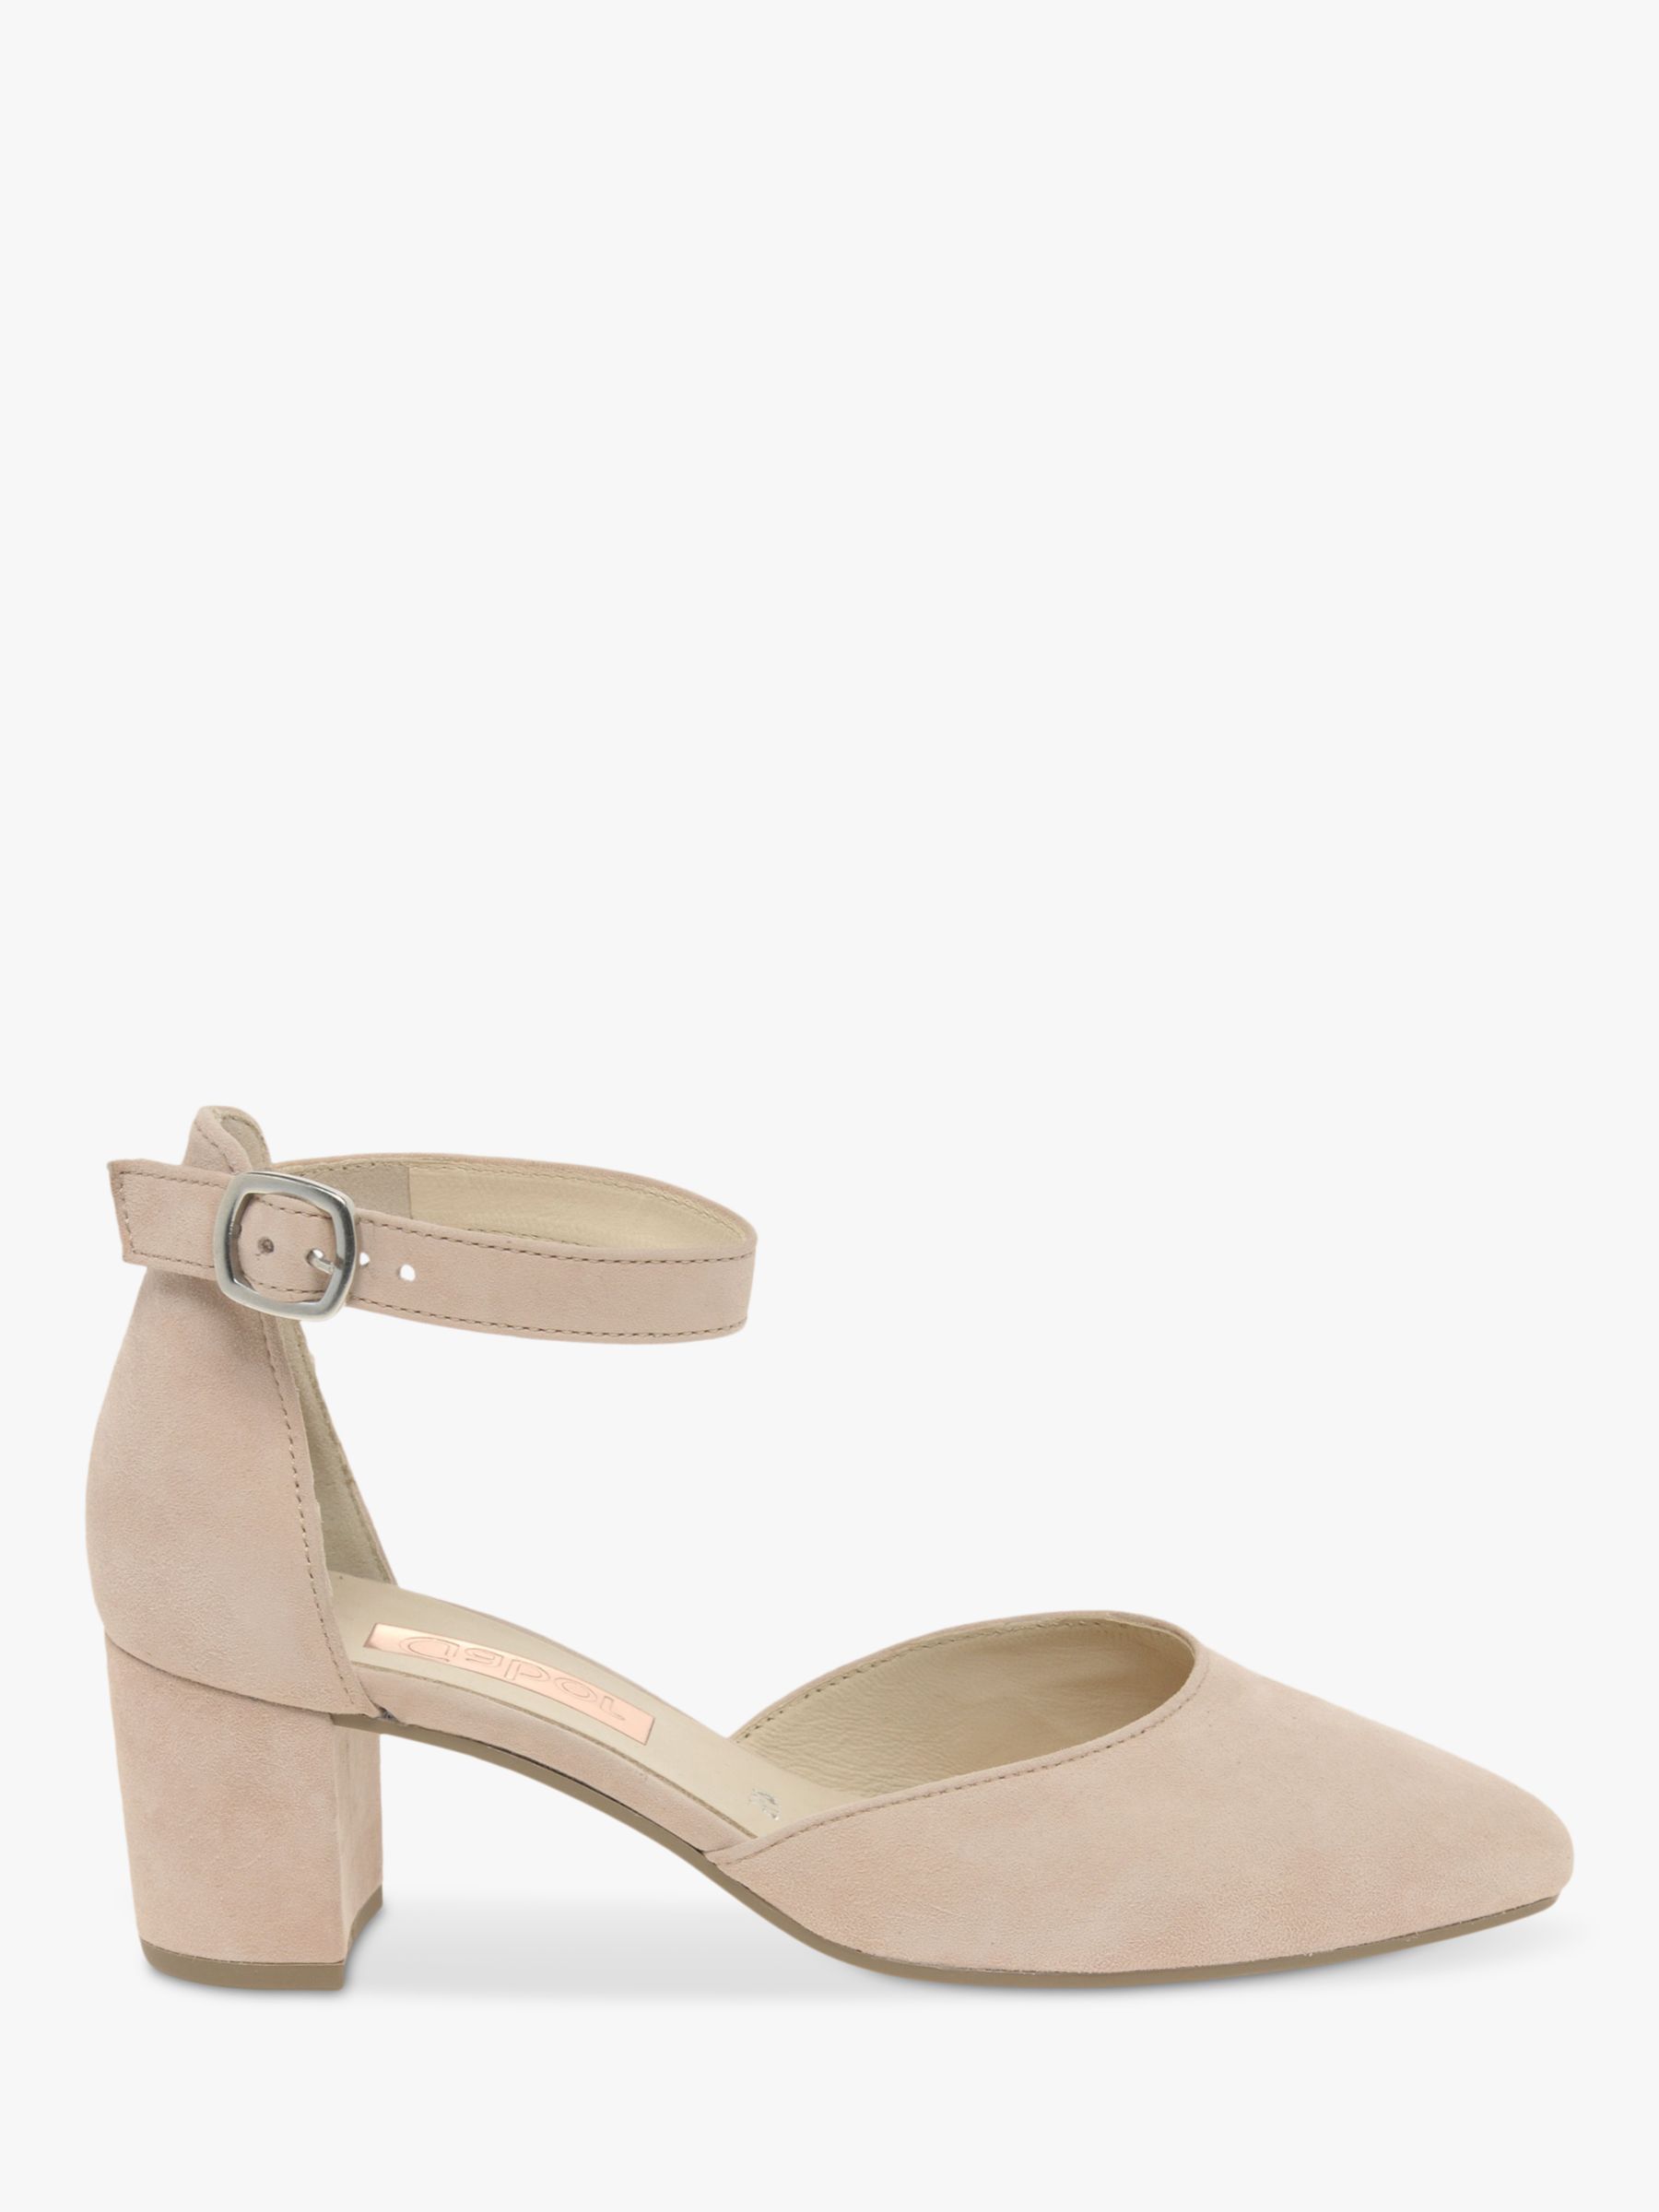 Gabor Gala Ankle Strap Court Shoes, at John &